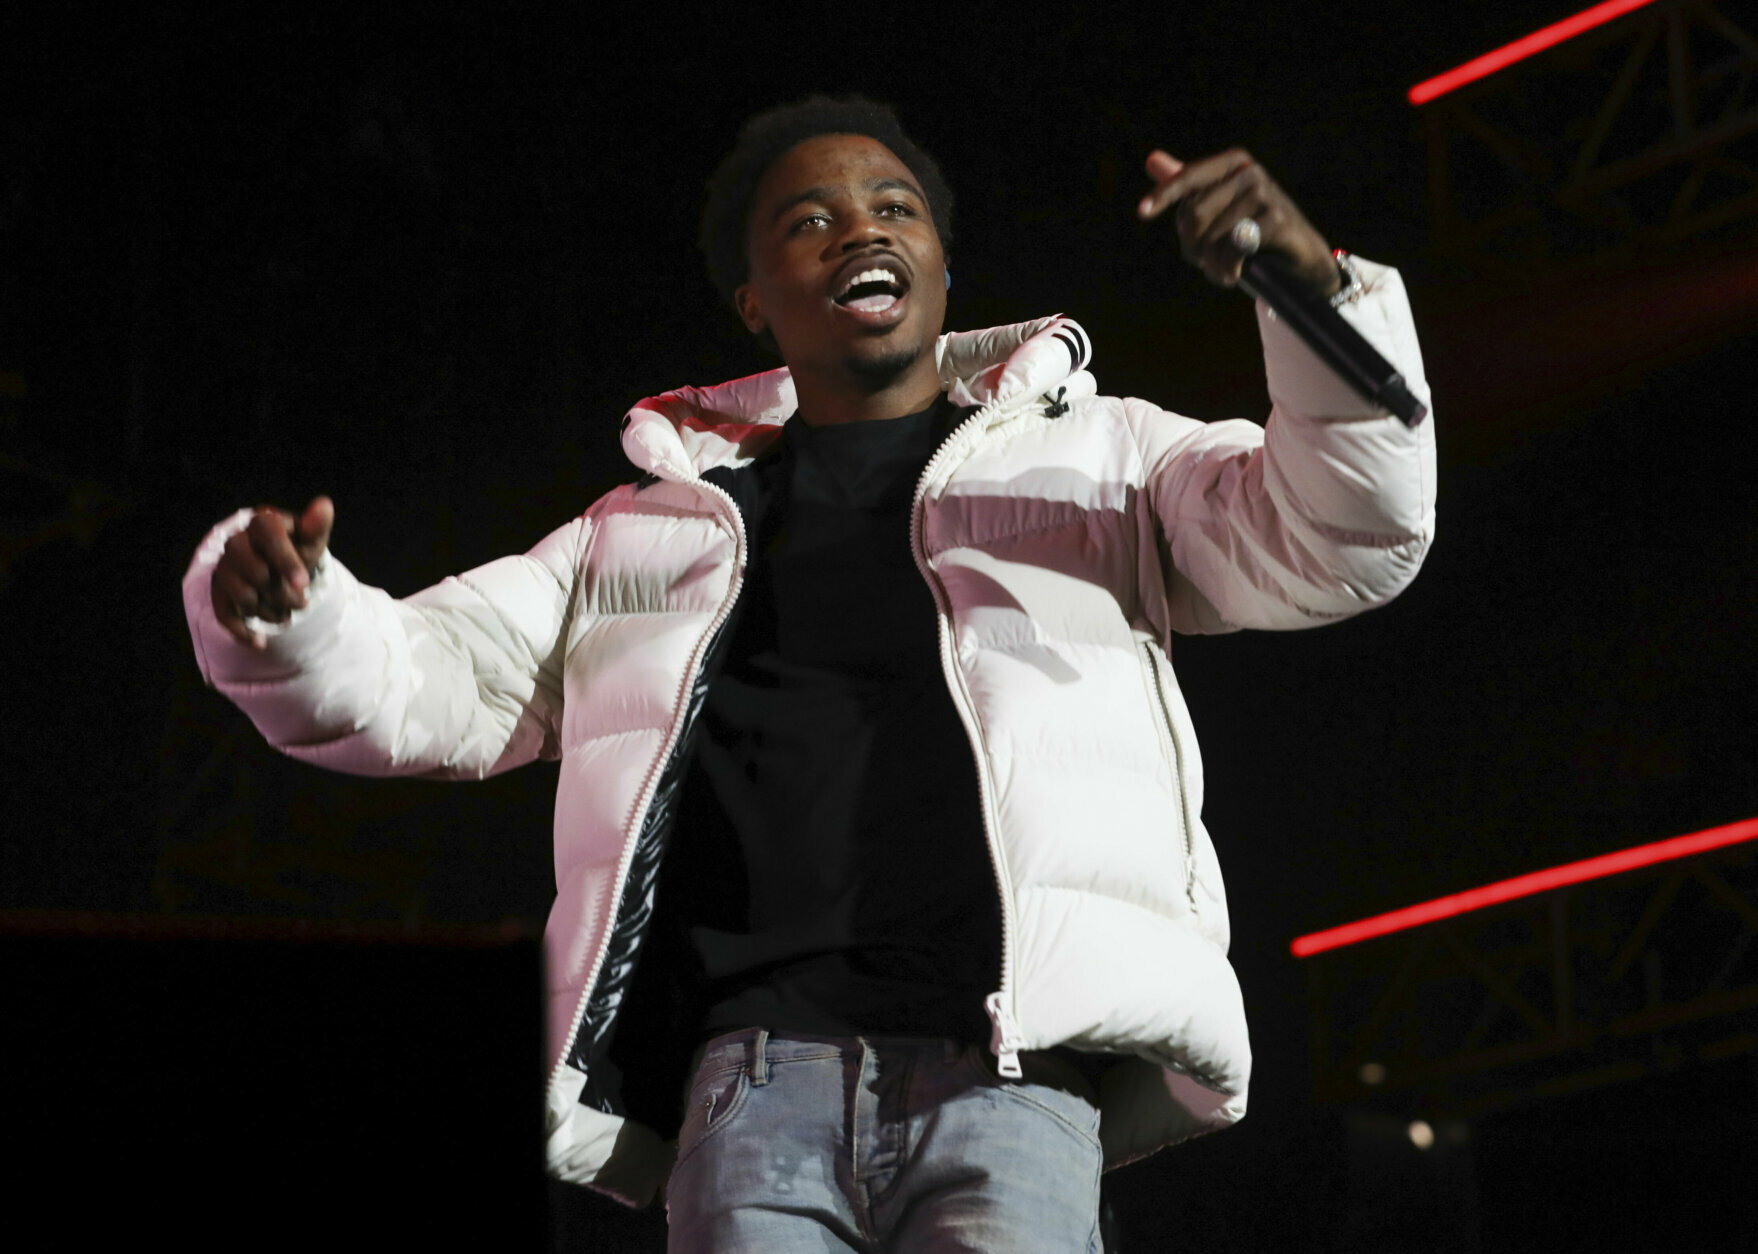 <p>Roddy Ricch&#8217;s nominations include: Record of the Year (&#8220;DaBaby&#8221; featuring Roddy Ricch) and Song of the Year (“The Box,” Roddy Ricch and Samuel Gloade).</p>
